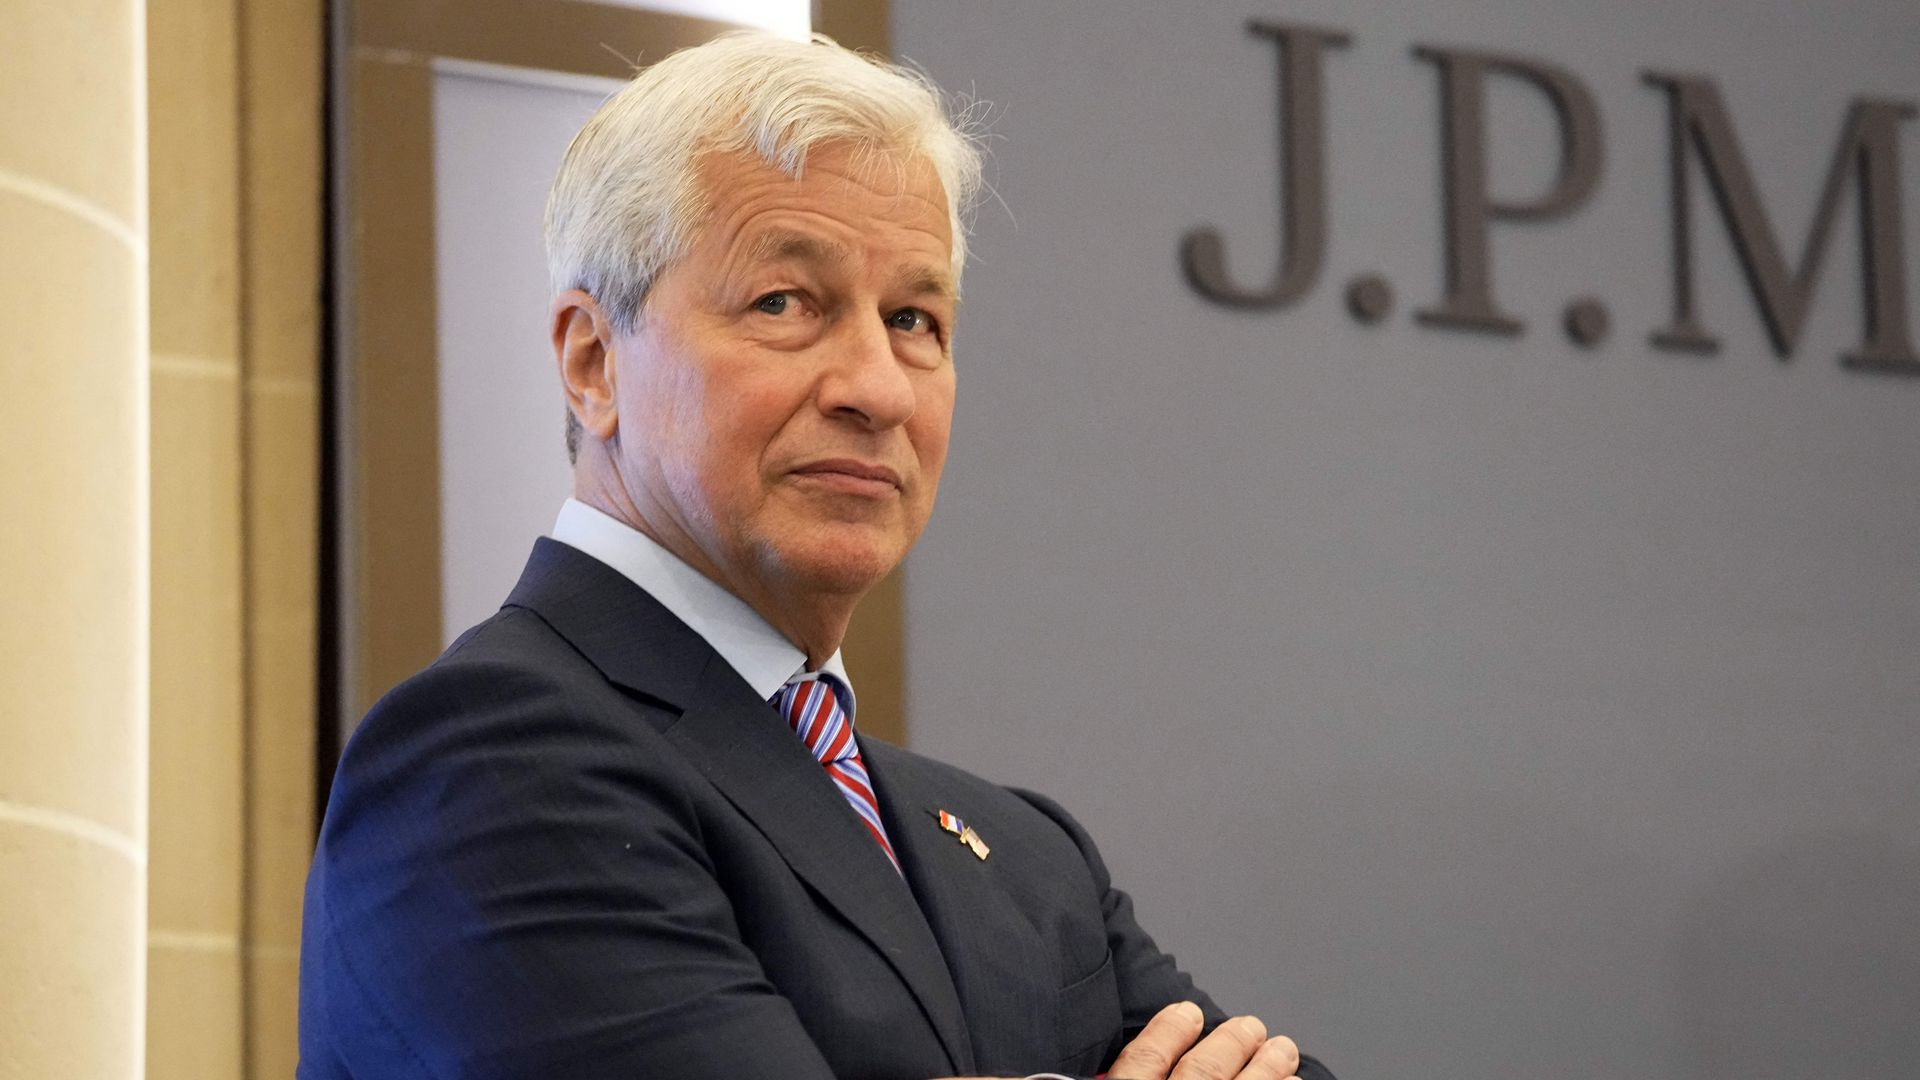 JPMorgan CEO Jamie Dimon walks back joke about Chinese Communist Party -  Axios